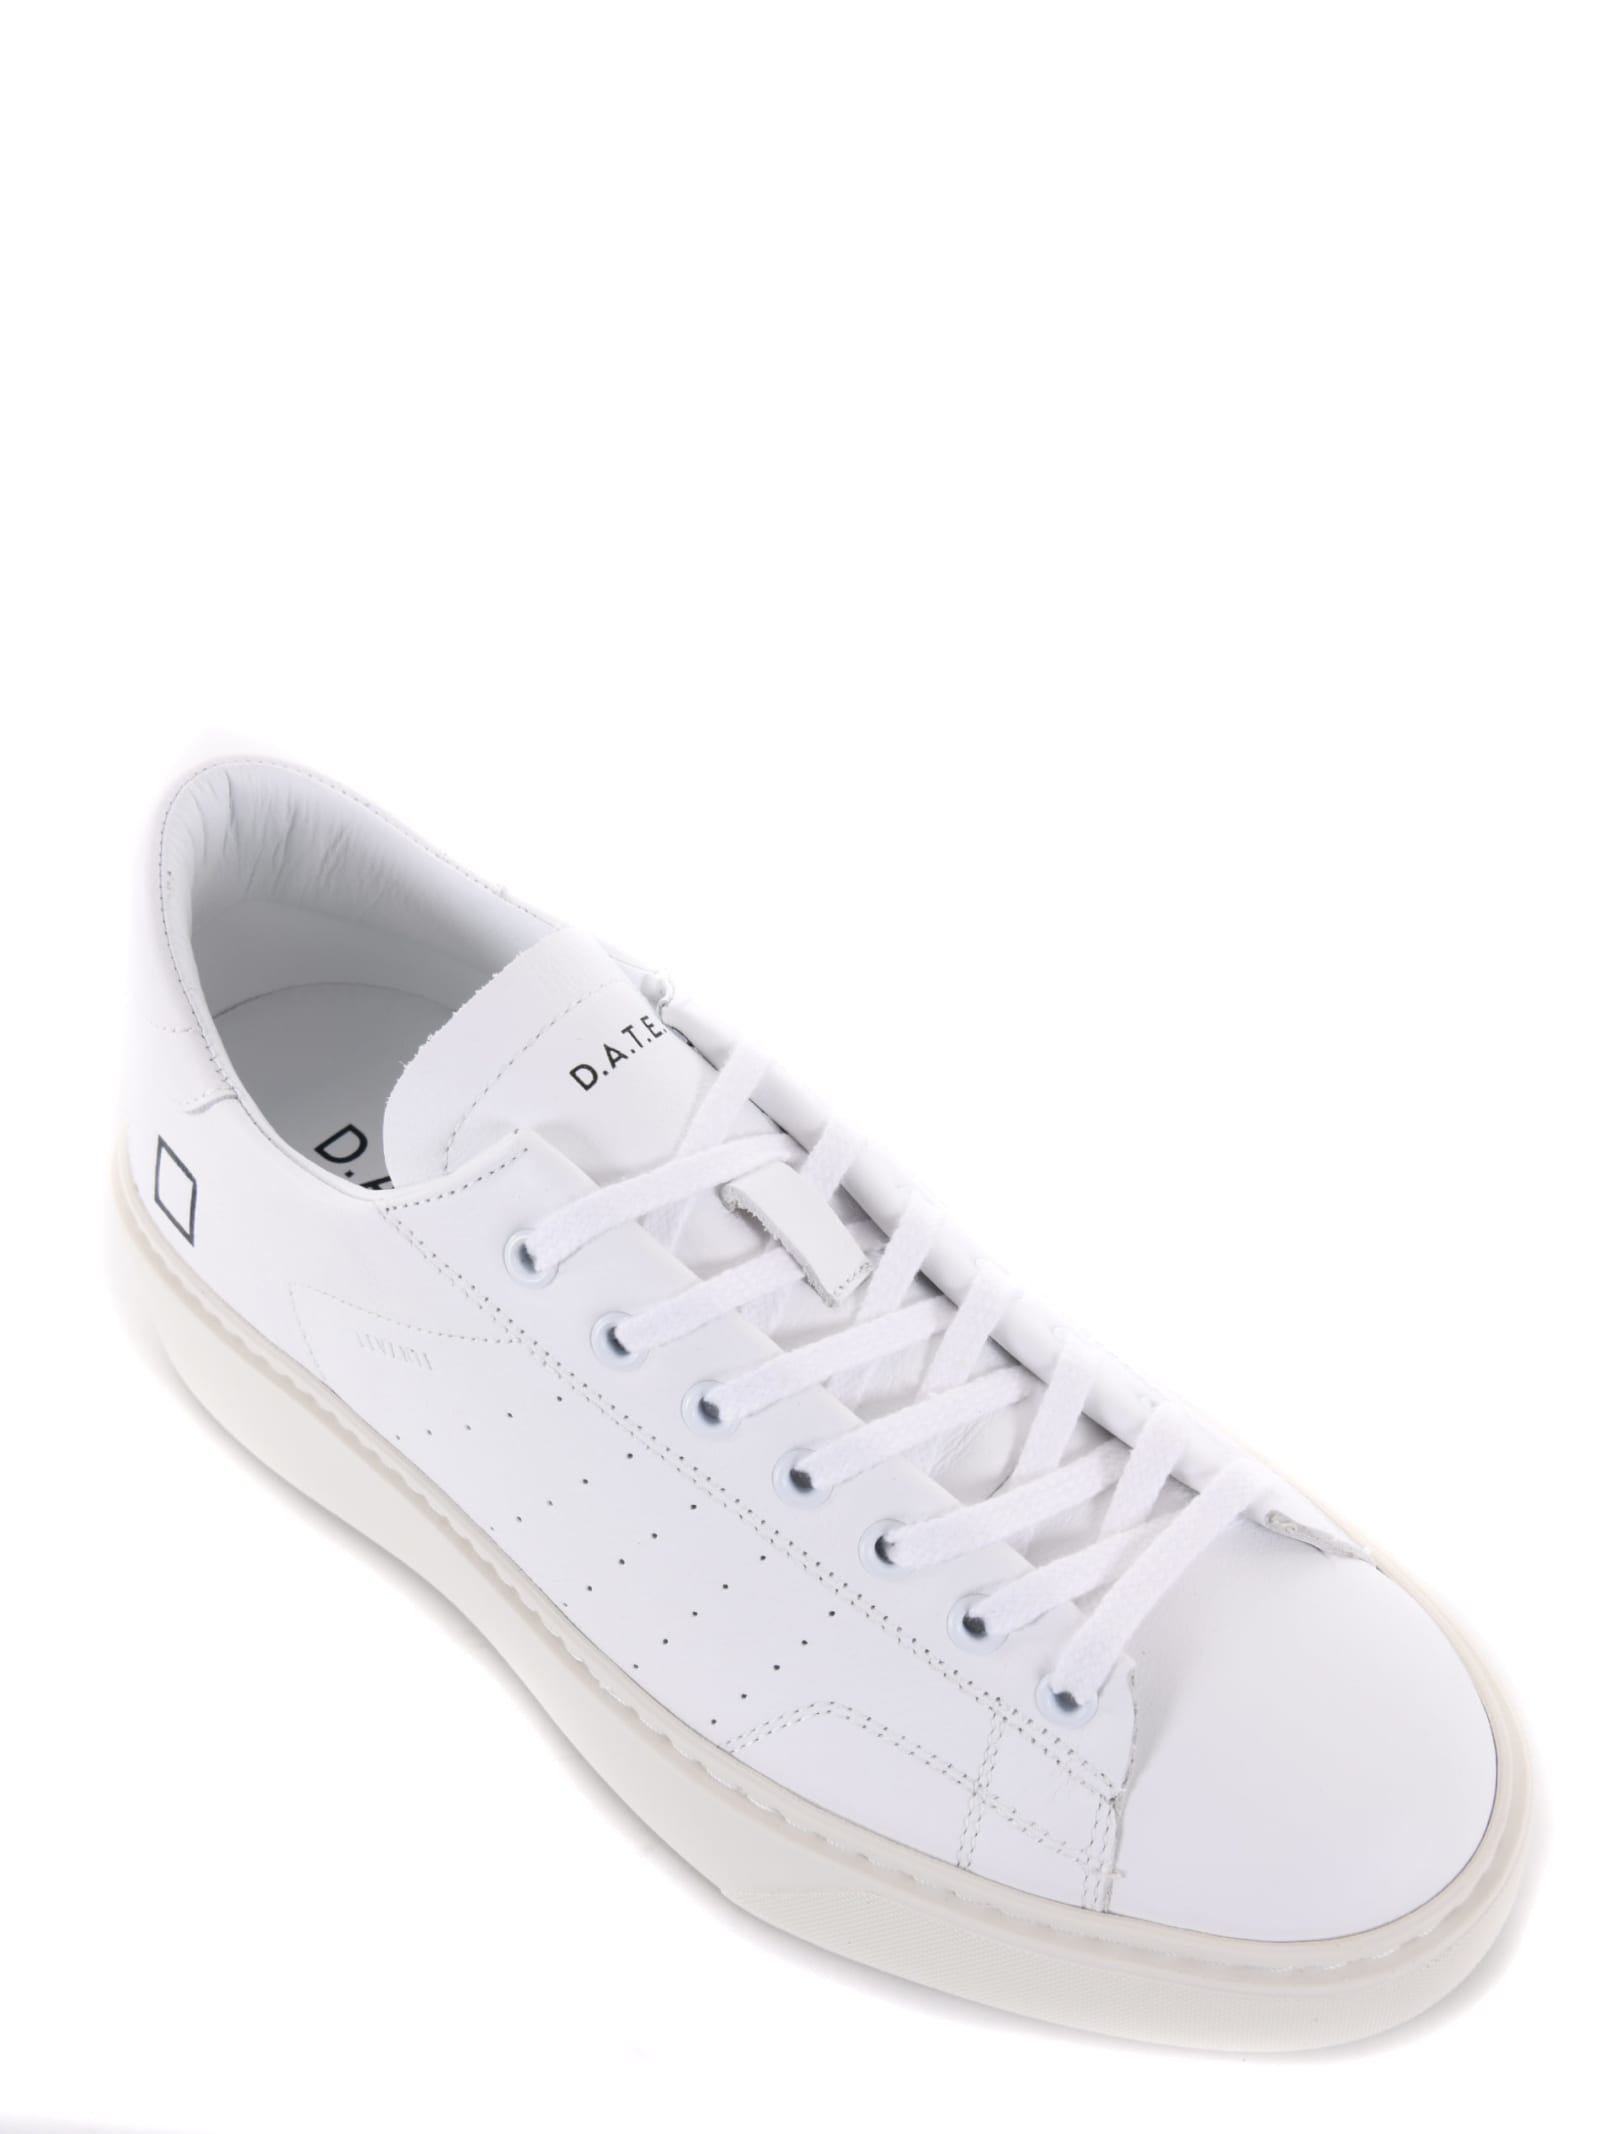 Shop Date D.a.t.e. Mens Sneakers Sonica Calf In Leather In White